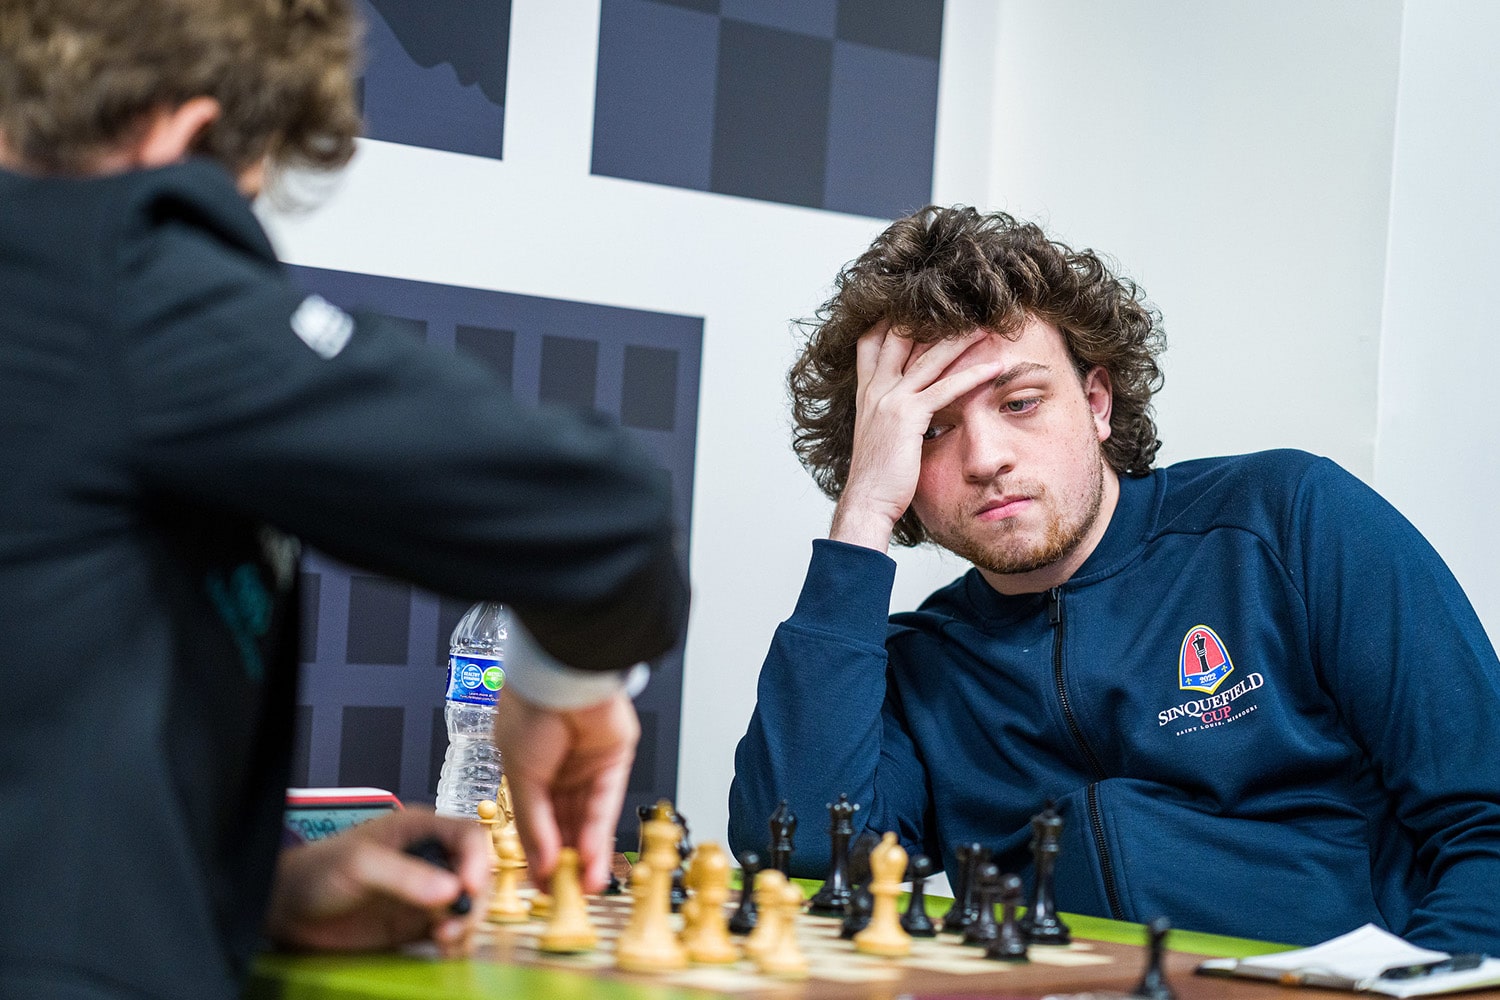 American chess grandmaster Hans Niemann watches opponents move during chess match